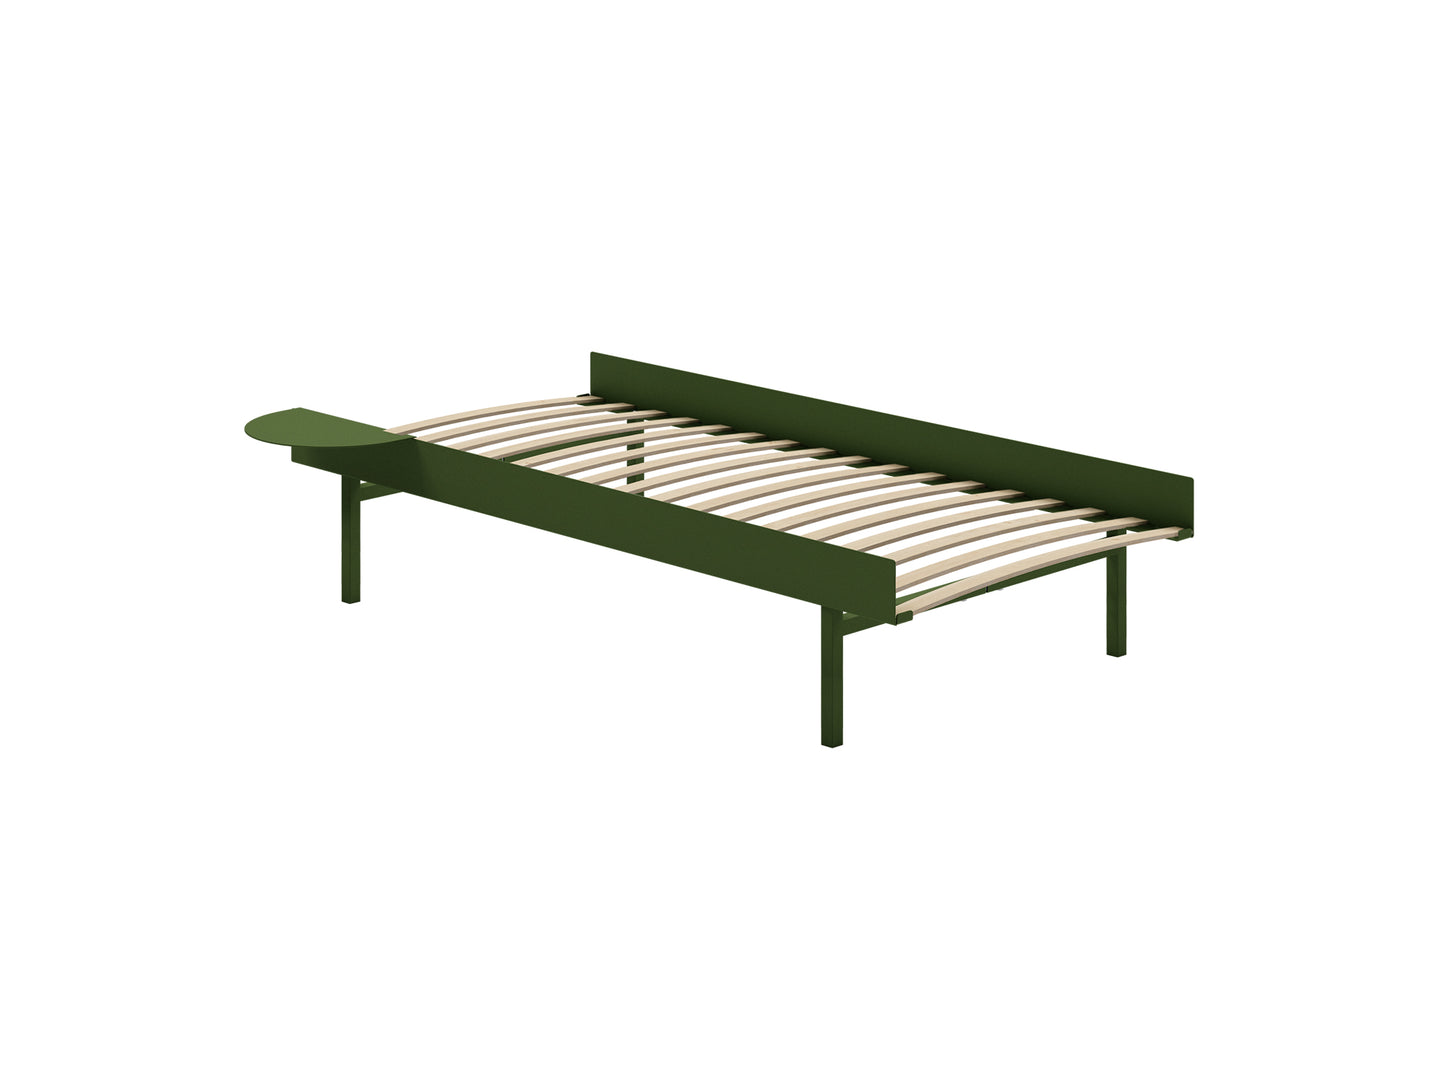 Bed 90 - 180 cm (High) by Moebe- Bed Frame / with 90cm wide Slats /  1 Side Table / Pine Green